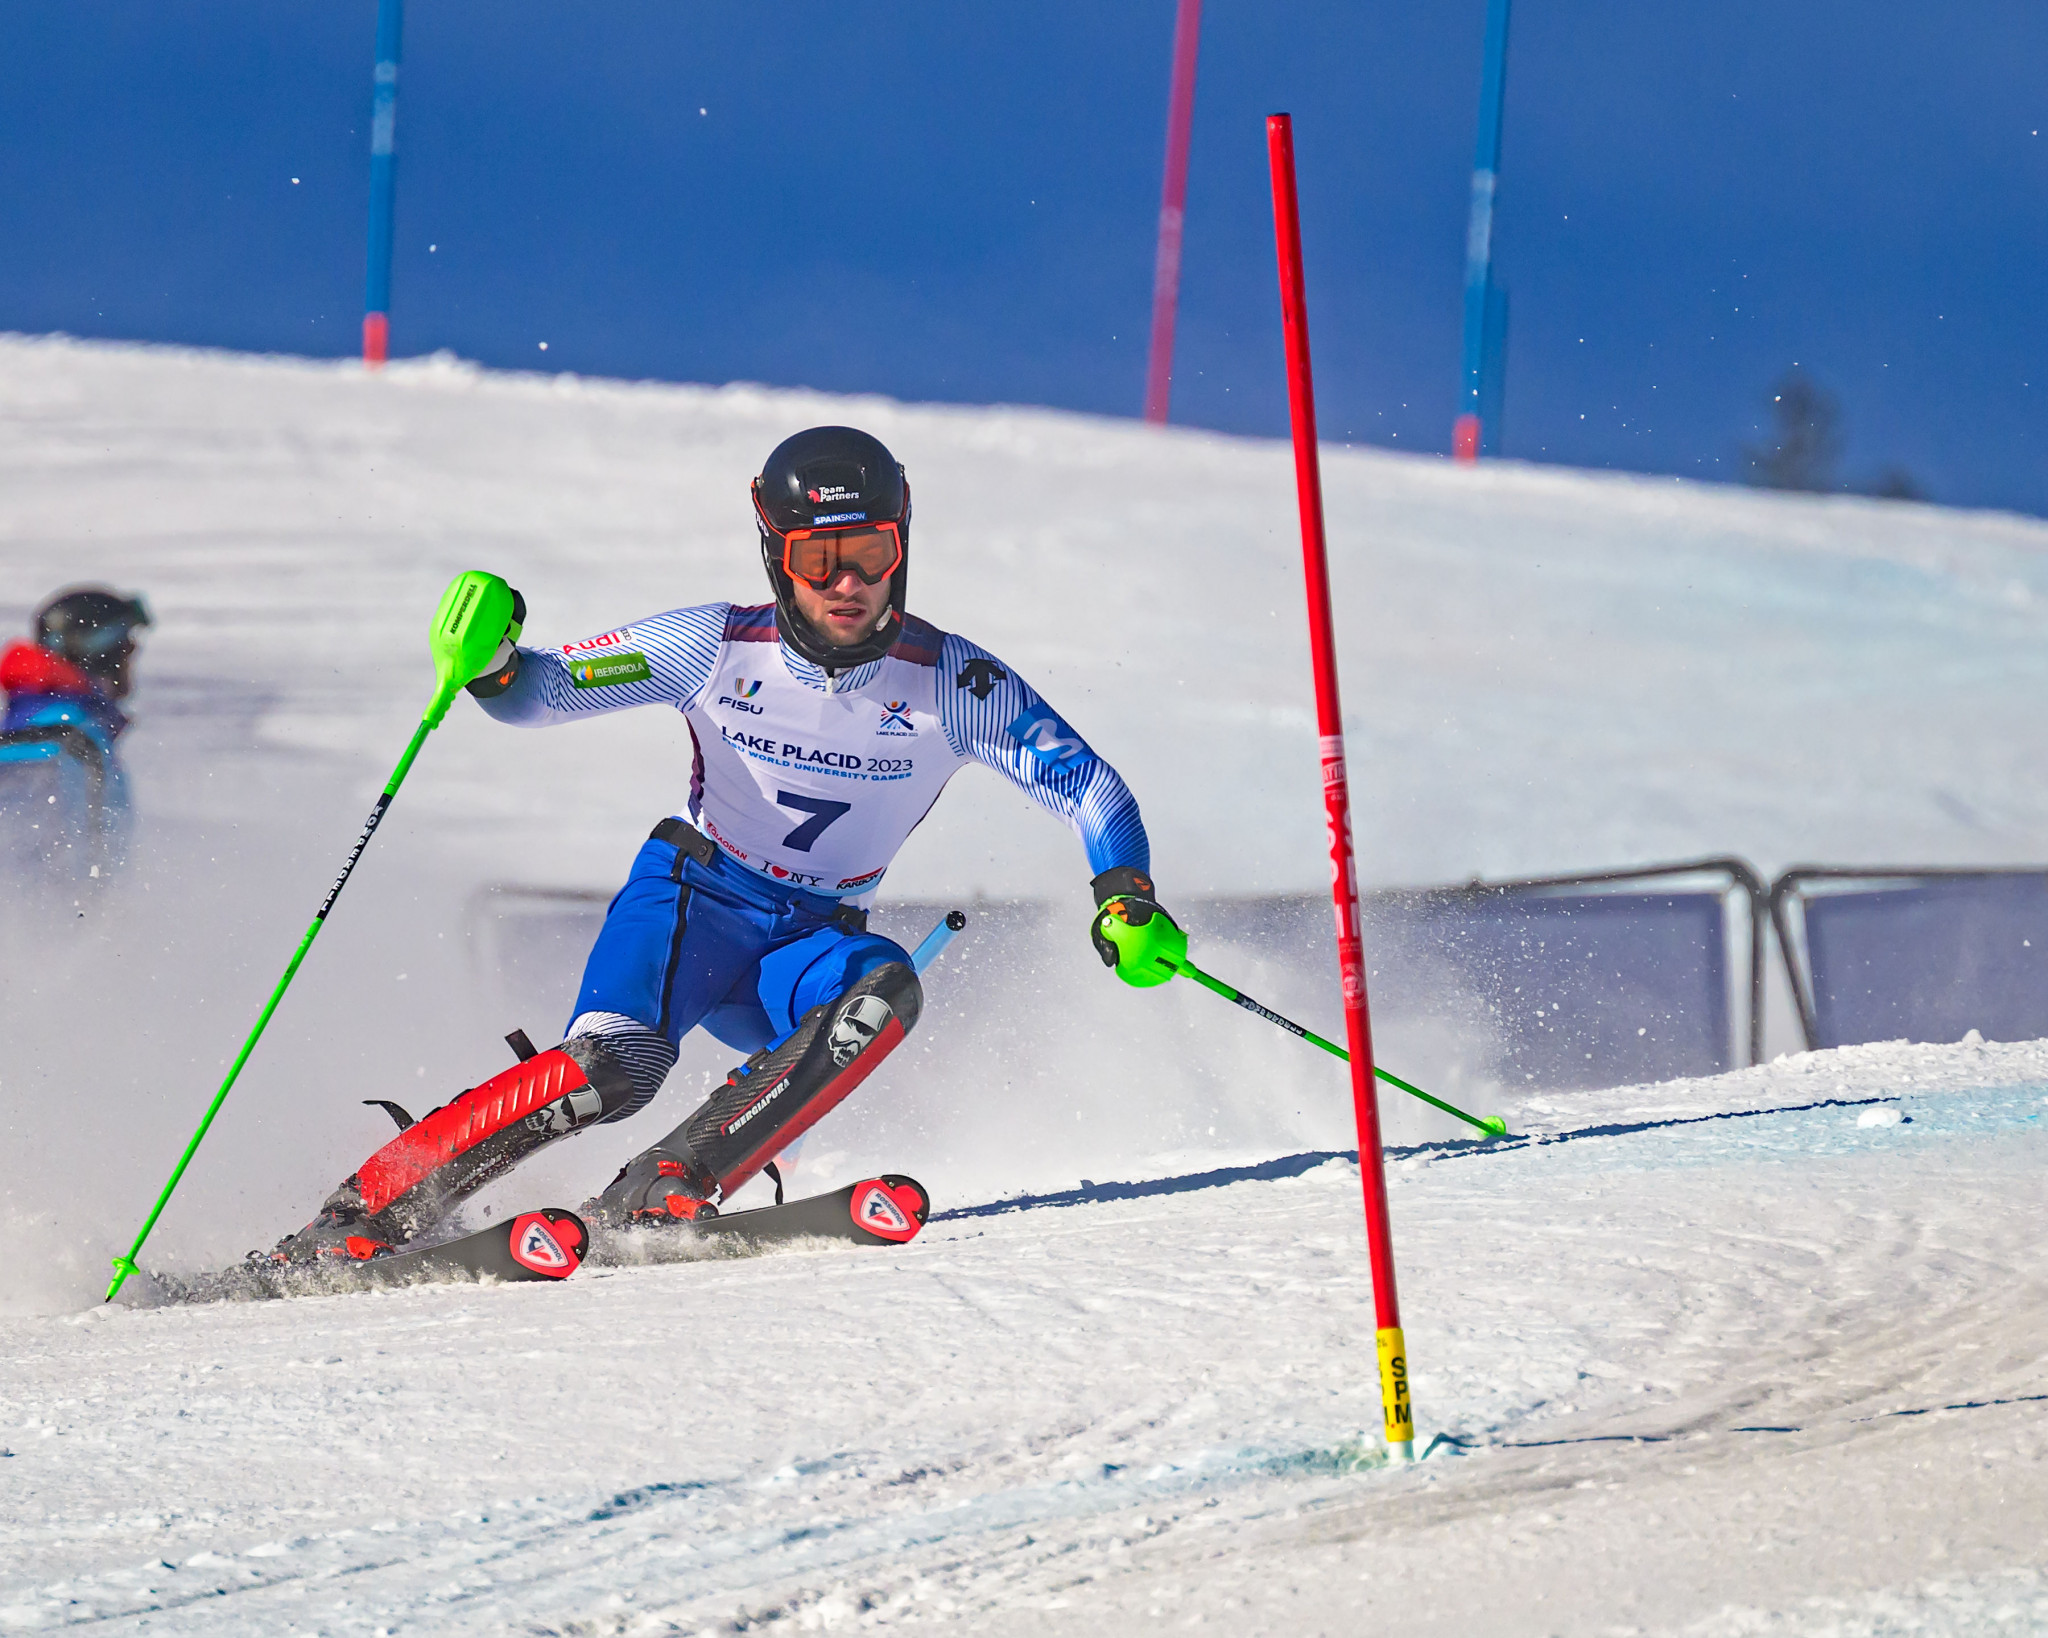 Superb Spain do Alpine combined double at Lake Placid 2023